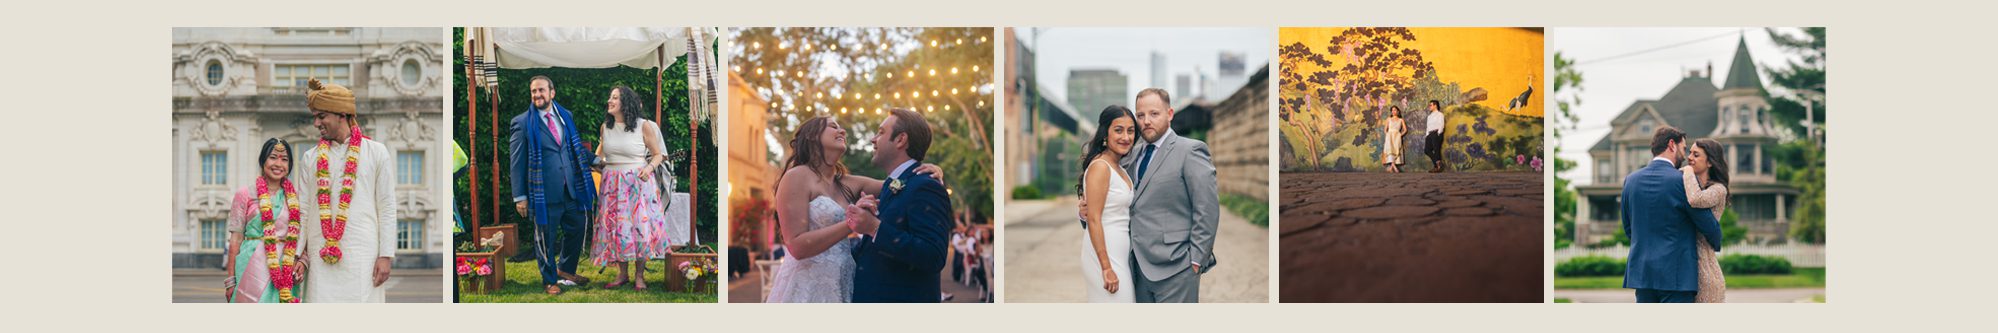 Thara Photo Chicago Wedding Photographer Photography West Loop Olive Park Downtown Tim Hara